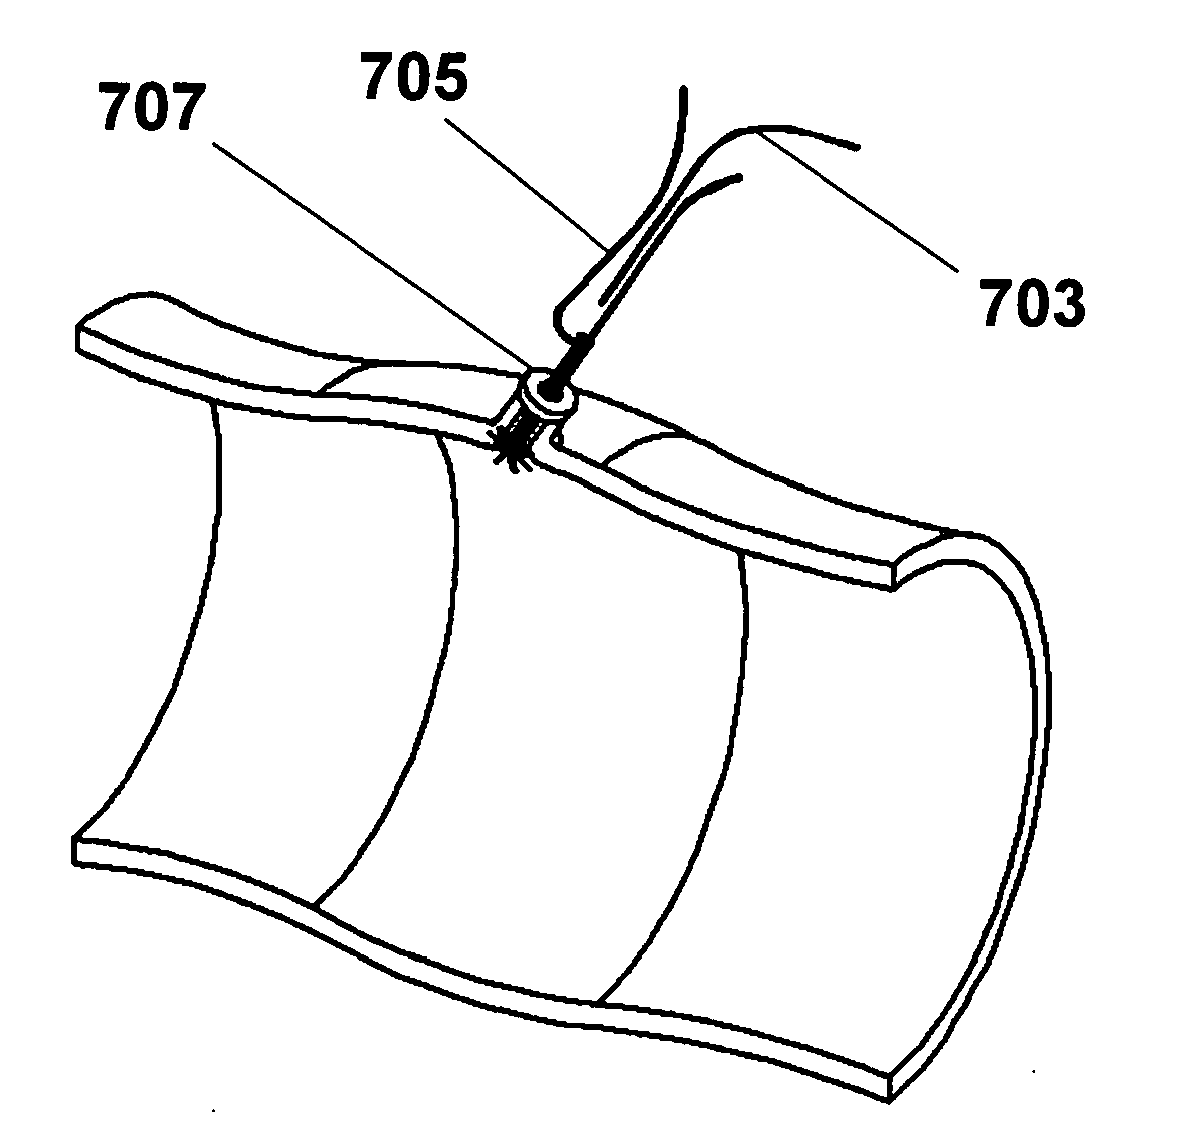 Vascular Closure Methods and Apparatuses